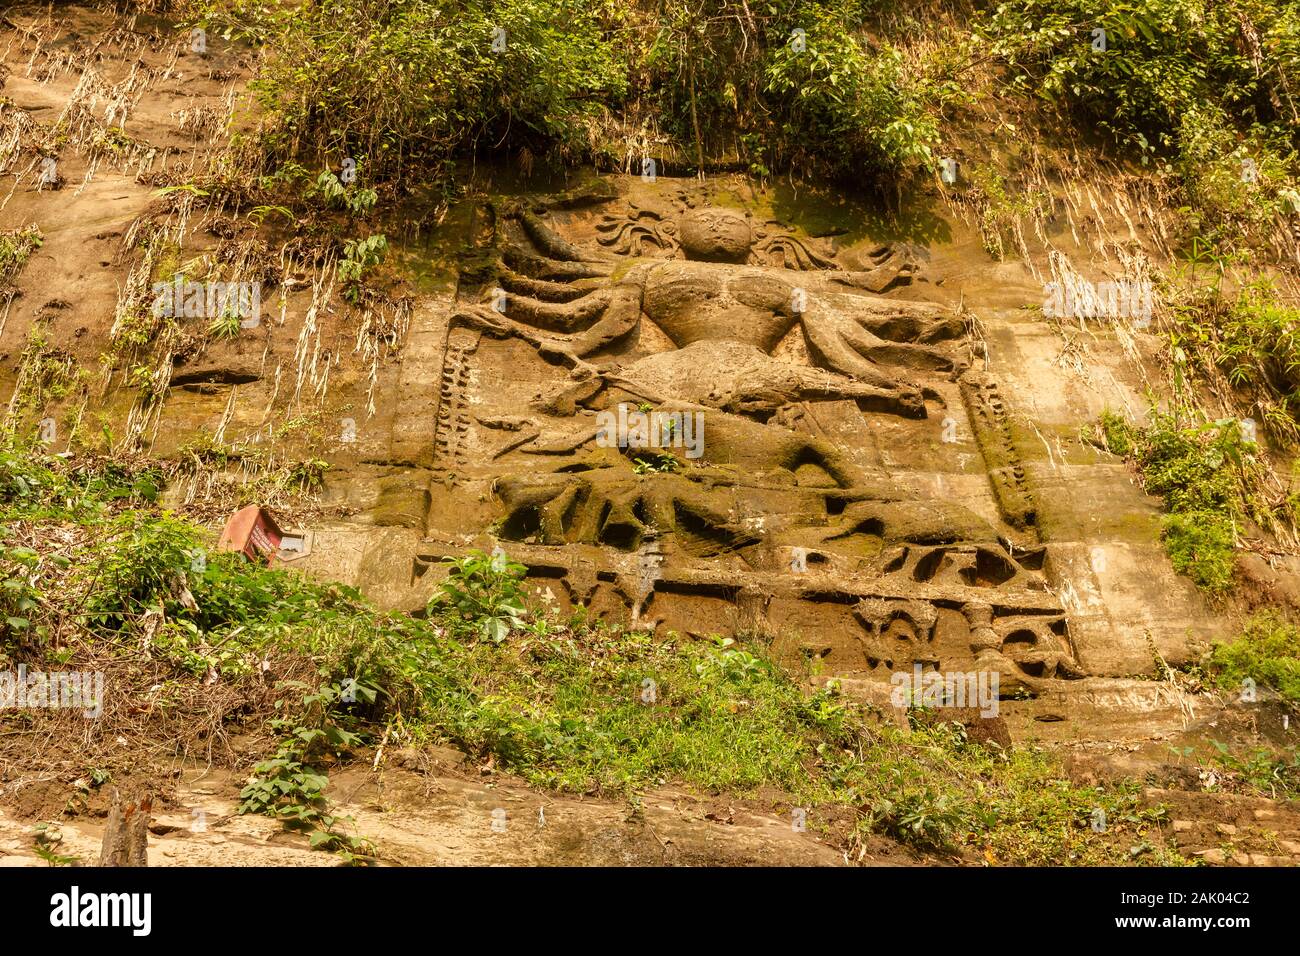 An ancient sculpture of the Hindu goddess Durga carved on the steep mountain wall around the village of Chabimura in Tripura, India. Stock Photo